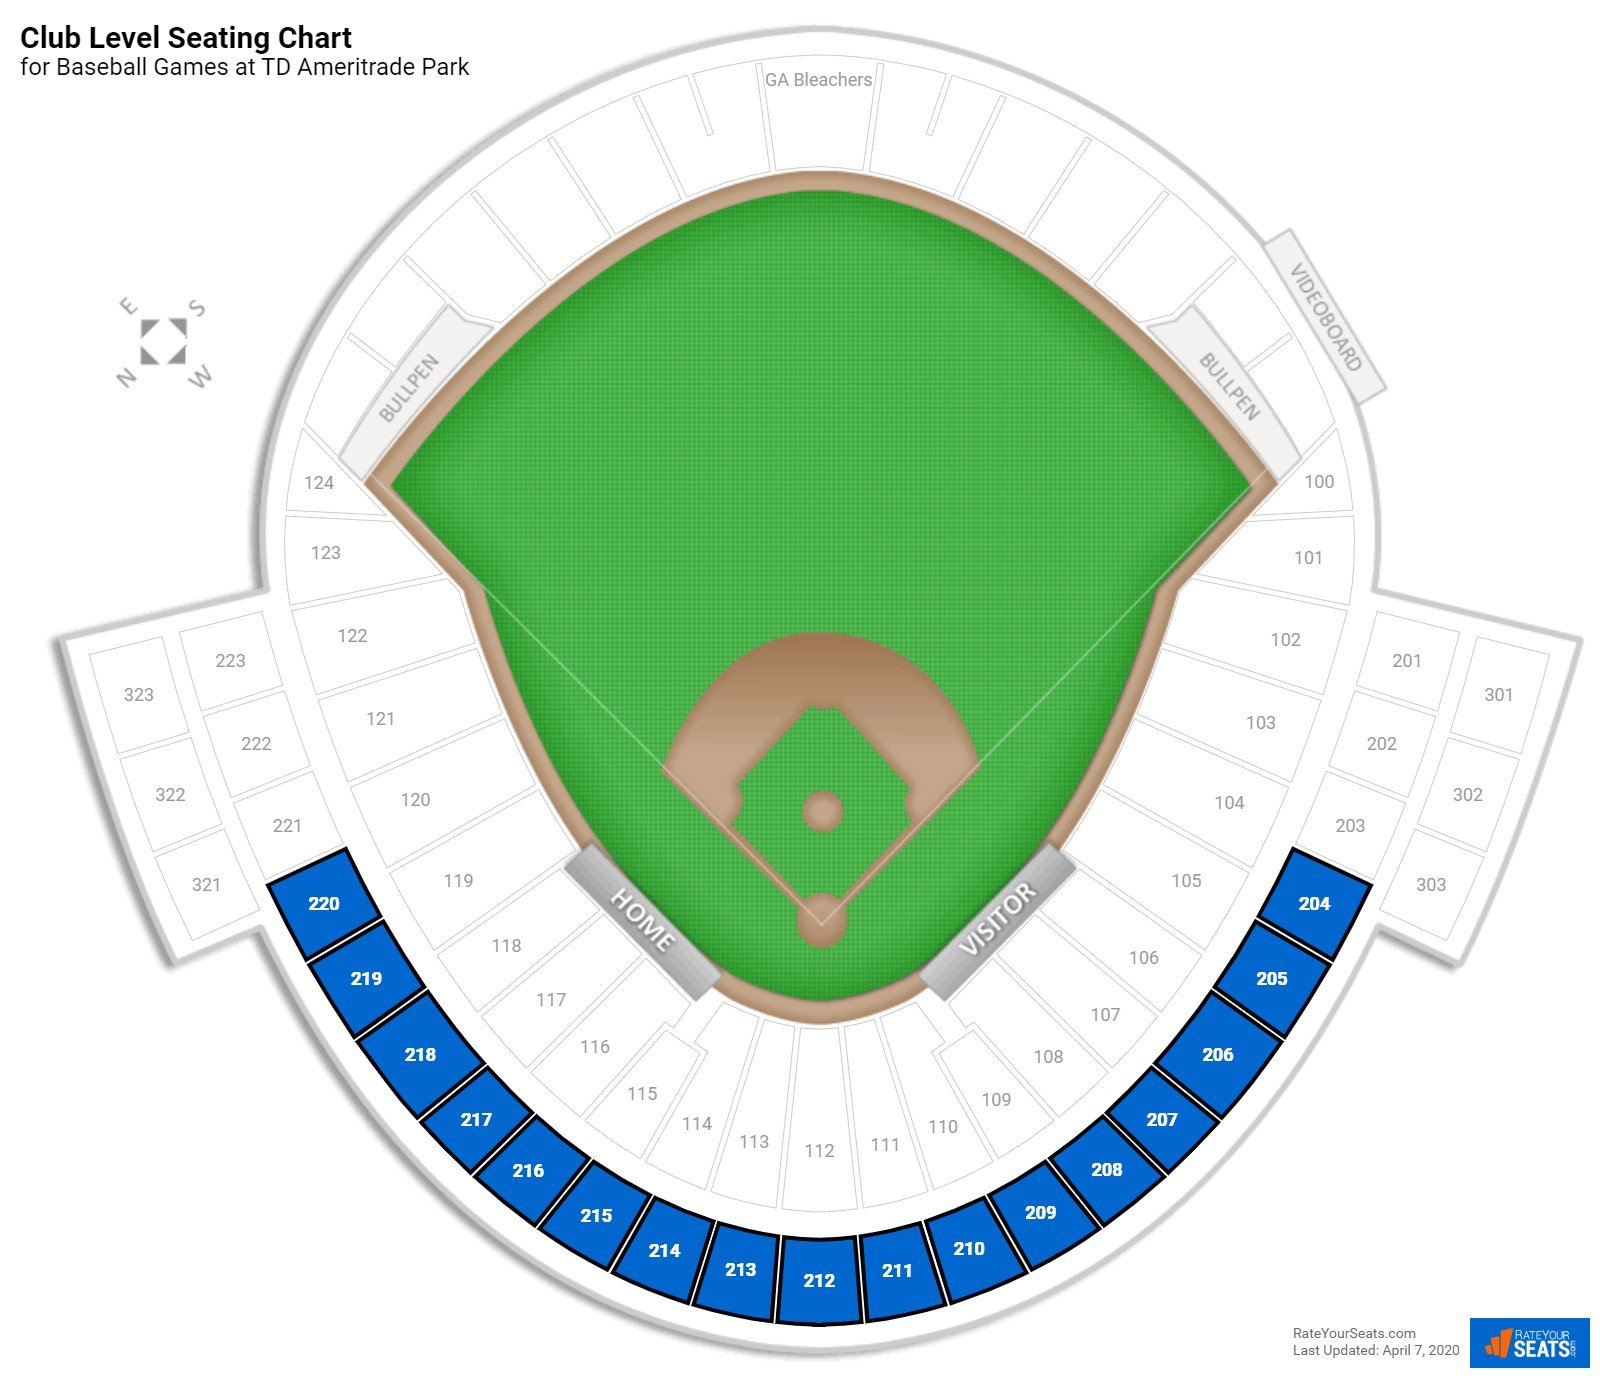 TD Ameritrade Park Seating for Baseball - RateYourSeats.com